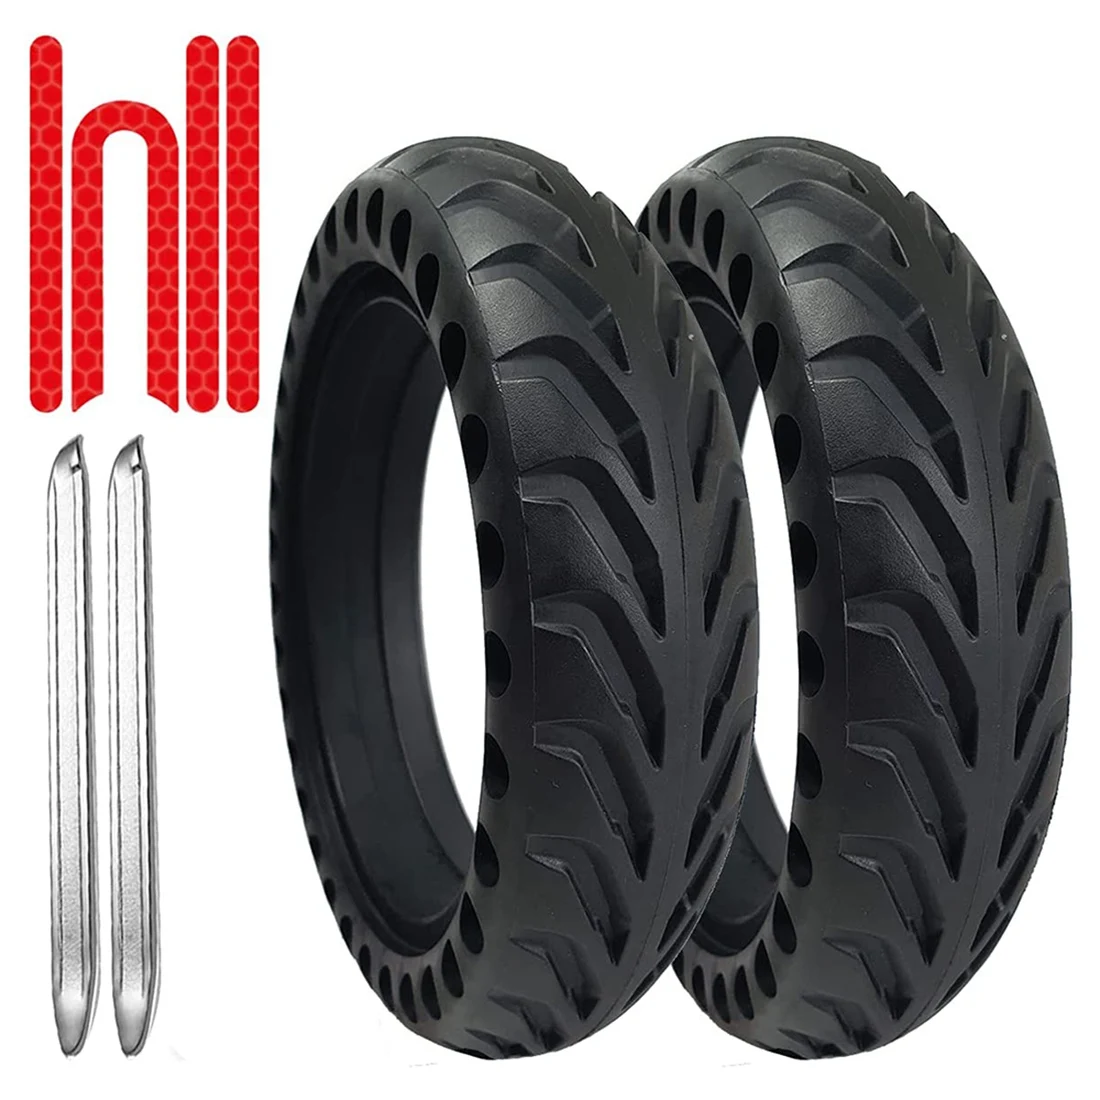 

Solid Wheels Tires for Xiaomi M365-1S 8.5 Inches x 2 Units. - Solid Wheels Electric Scooter - Xiaomi M365 Wheels,Black